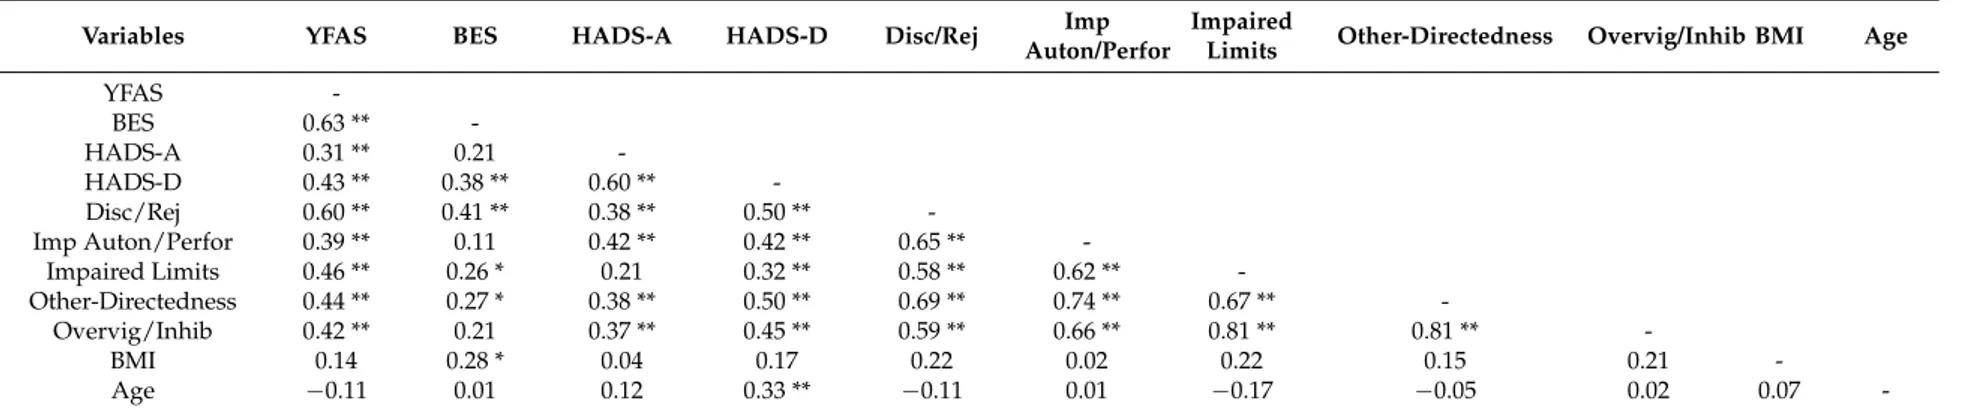 Table 2. Values of Pearson’s r correlation coefficient among variables in all samples (N = 70)